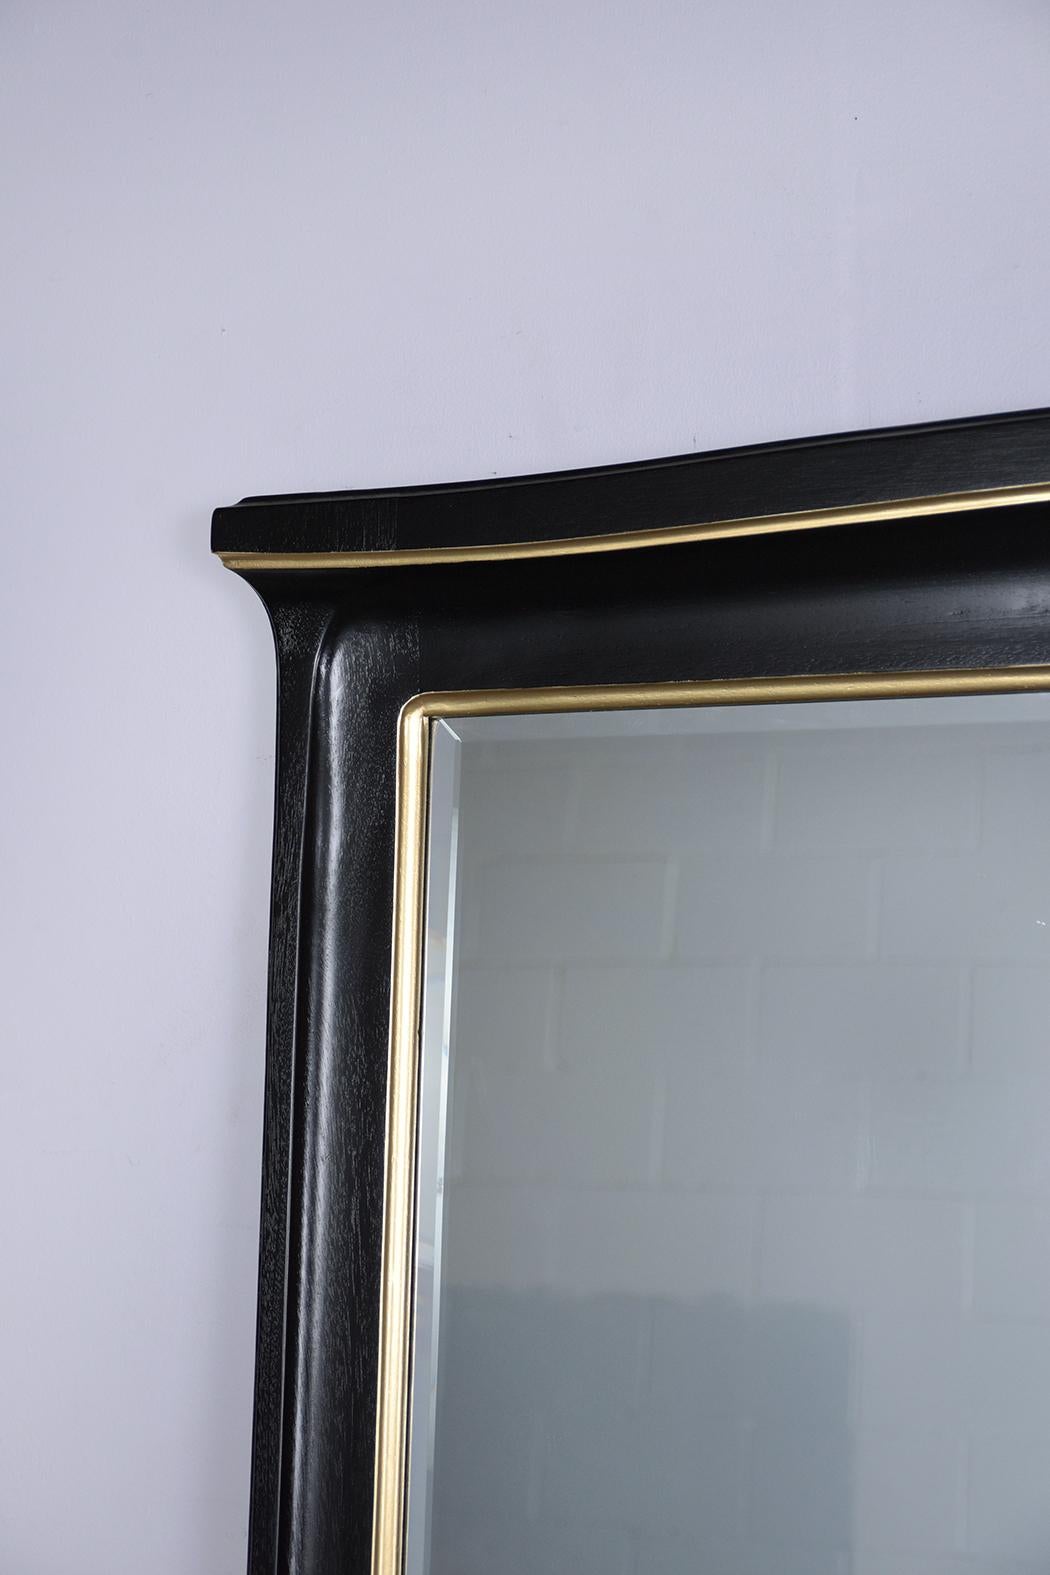 Lacquered 19th-Century Art Nouveau Mantel Mirror: Hand-Carved Mahogany with Ebonized Stain